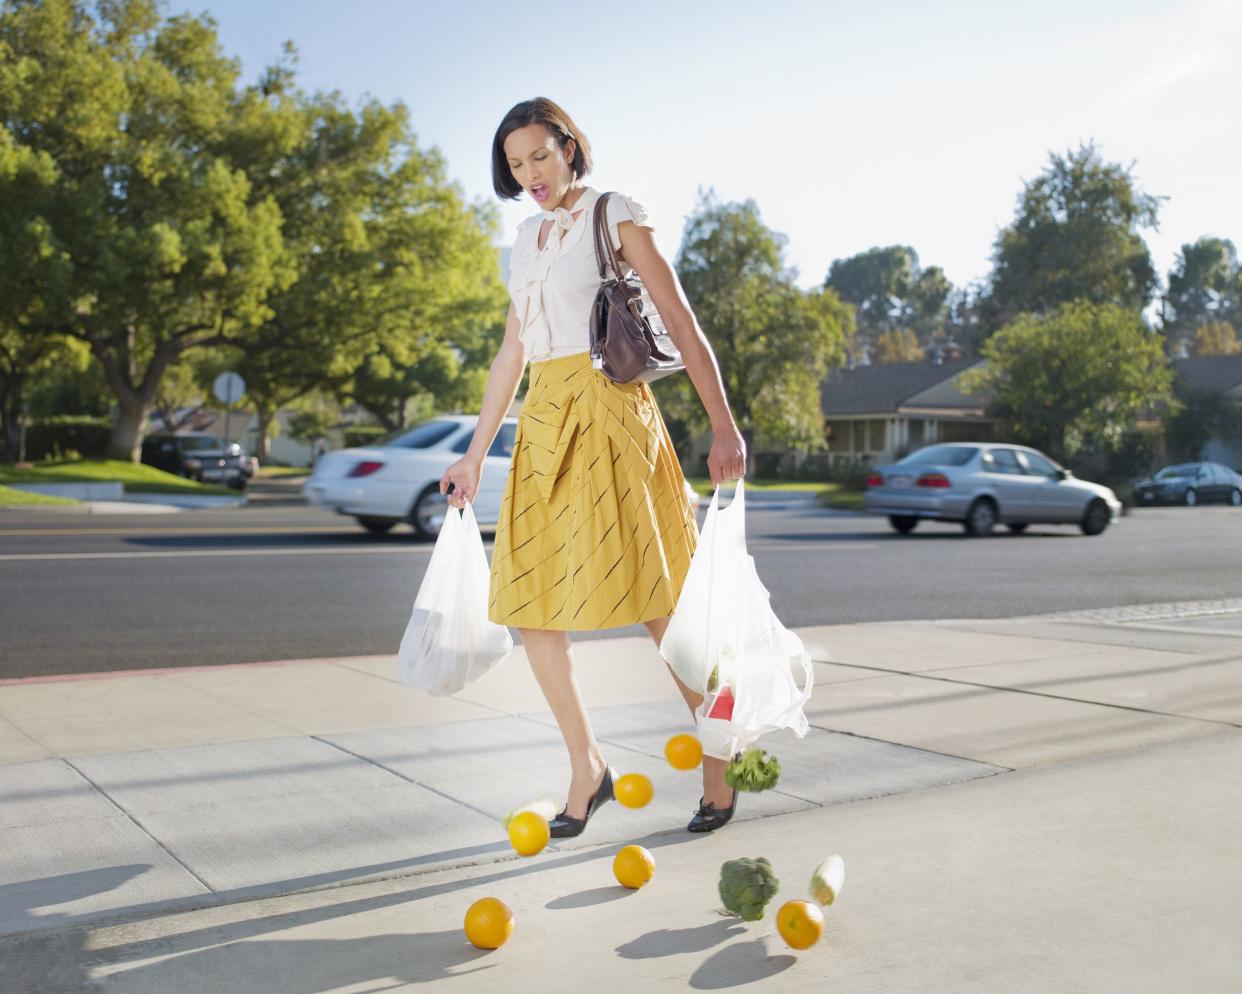 woman dropping groceries on sidewalk because she has a cheap bag